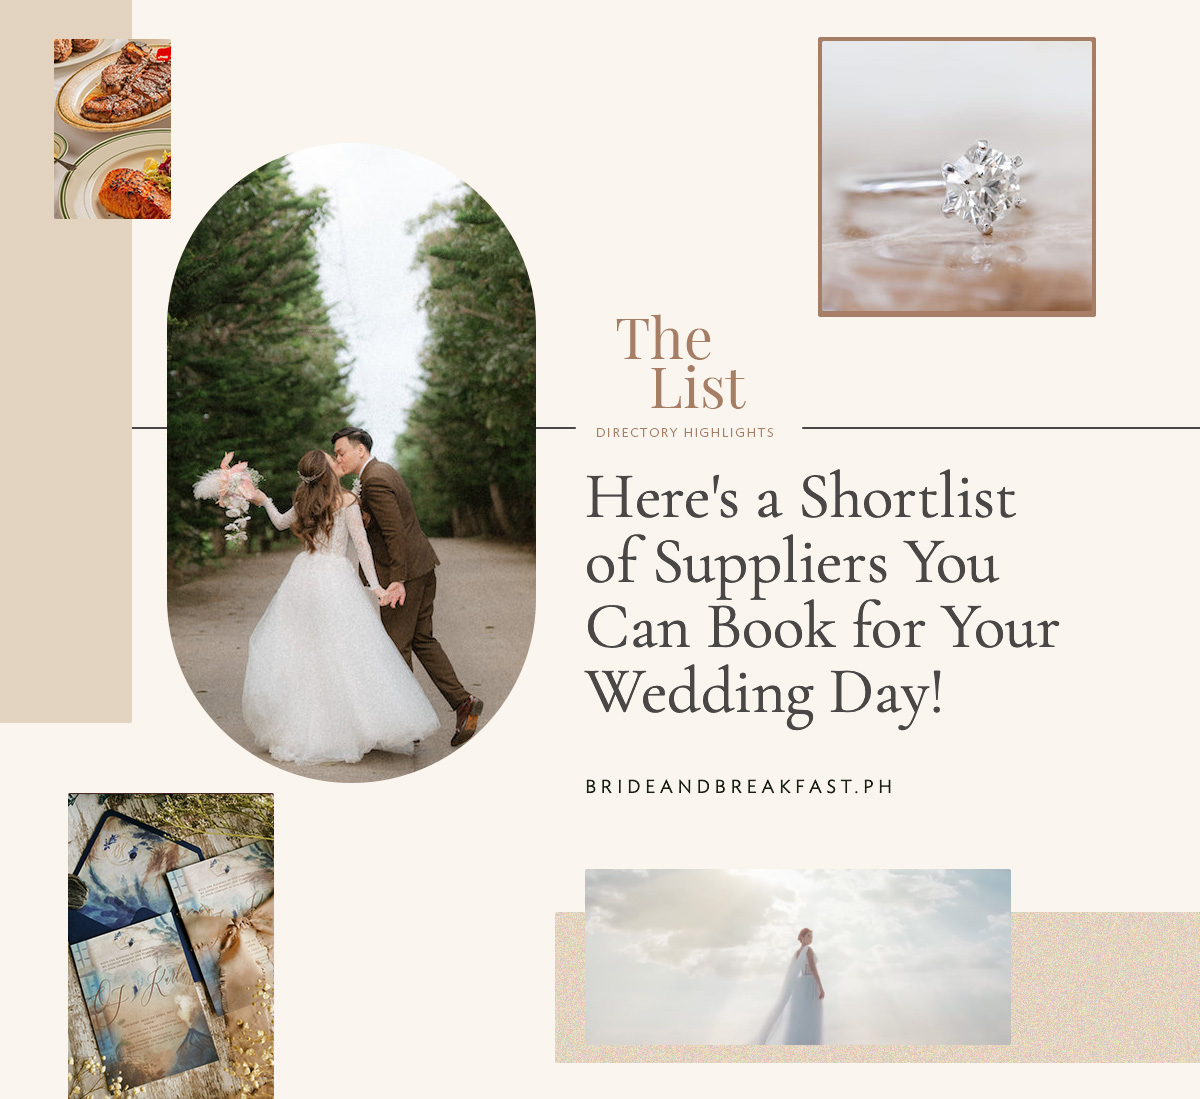 Here's a Shortlist of Suppliers You Can Book for Your Wedding Day!